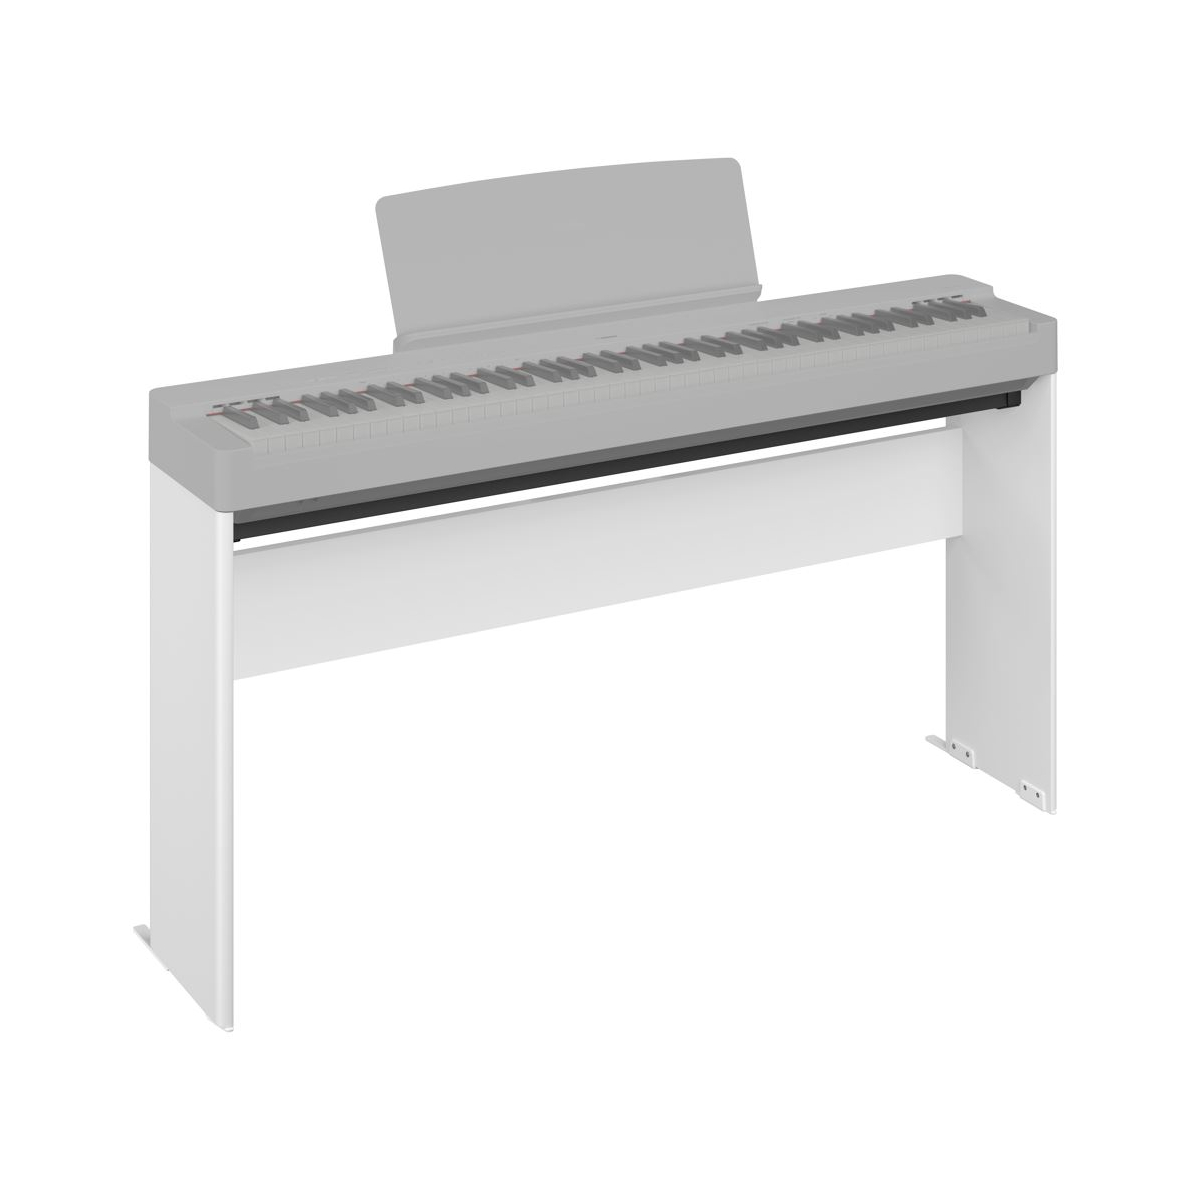 Stands claviers - Yamaha - L-200 (Blanc)